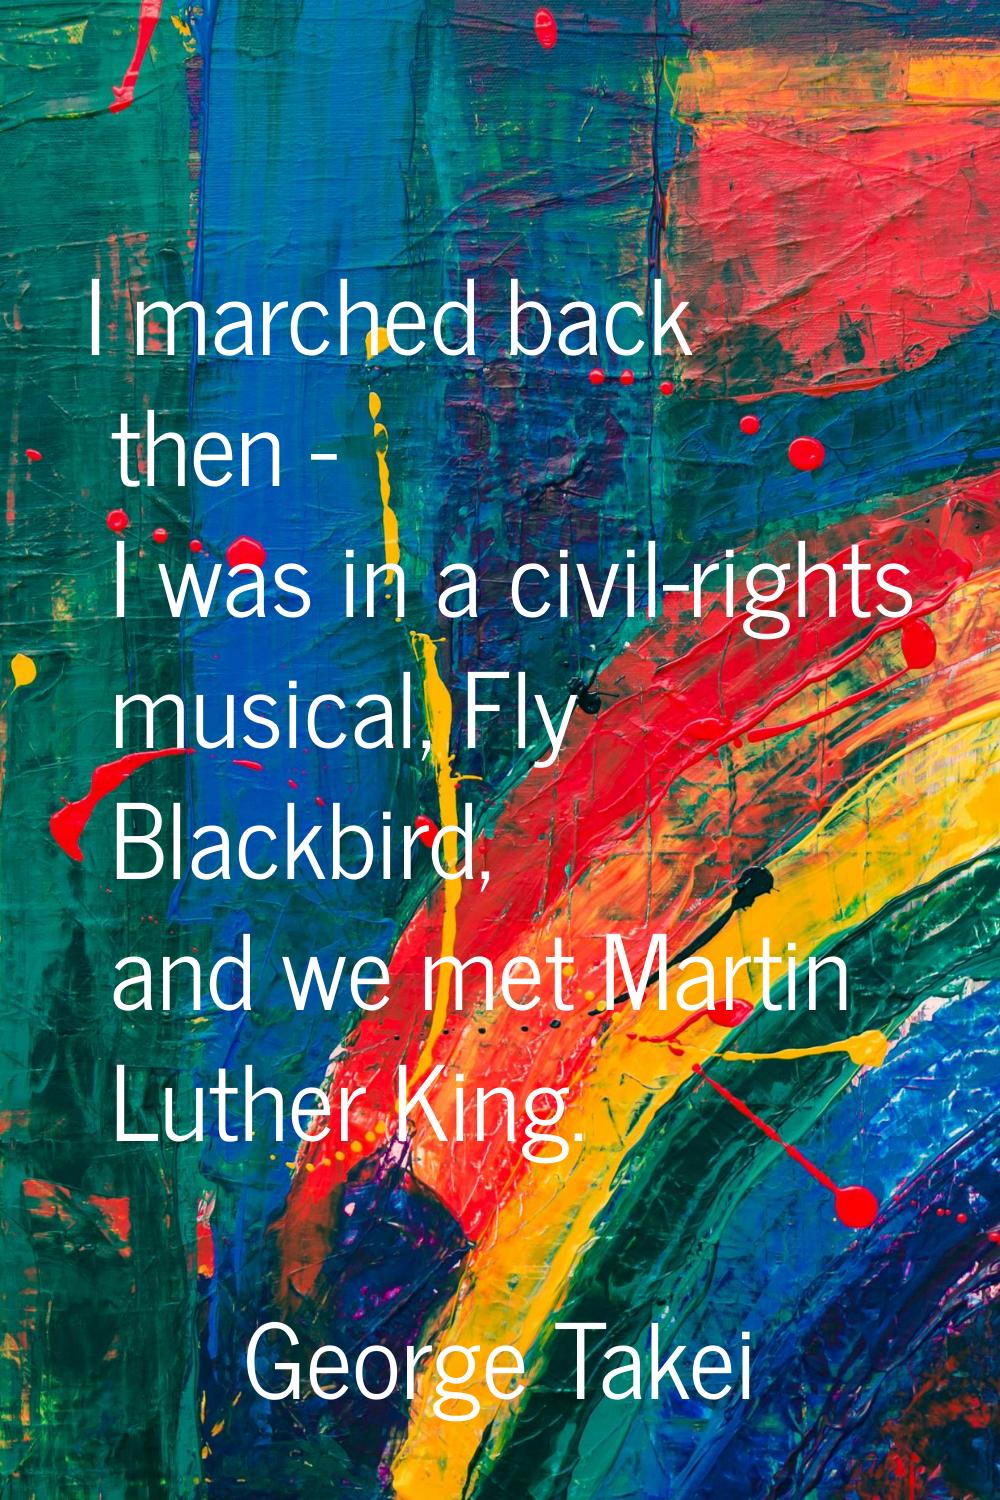 I marched back then - I was in a civil-rights musical, Fly Blackbird, and we met Martin Luther King